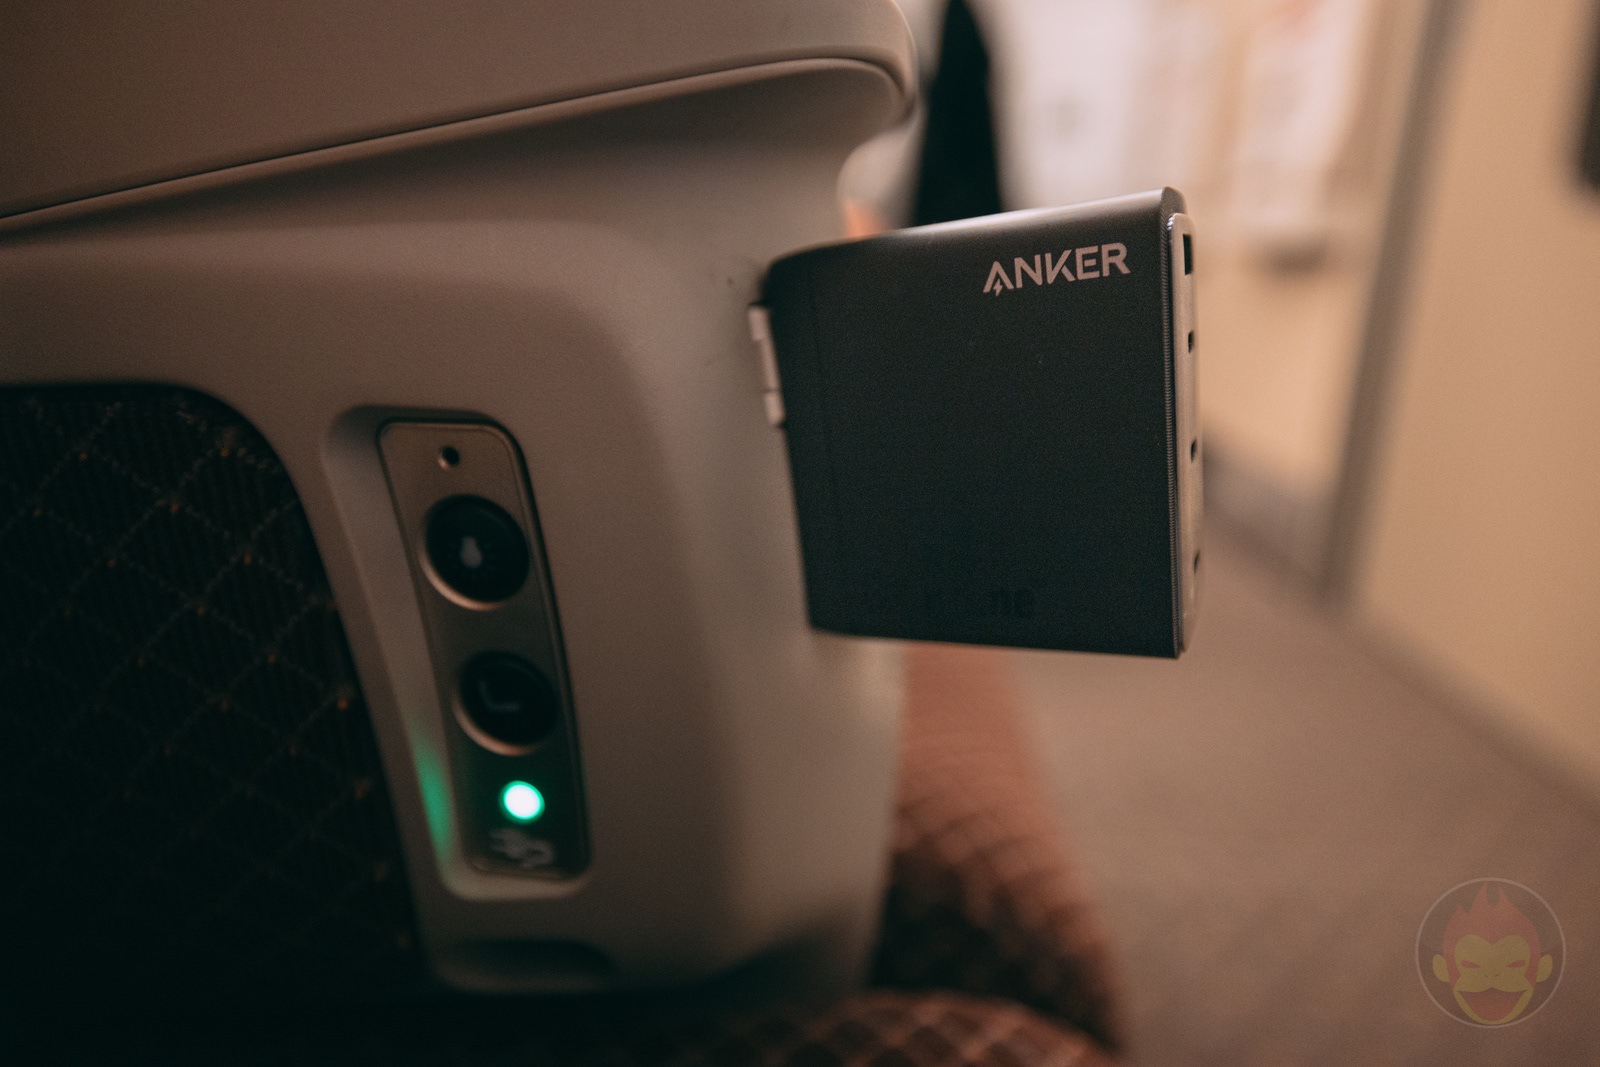 Anker Products I used on the trip to nagoya 02